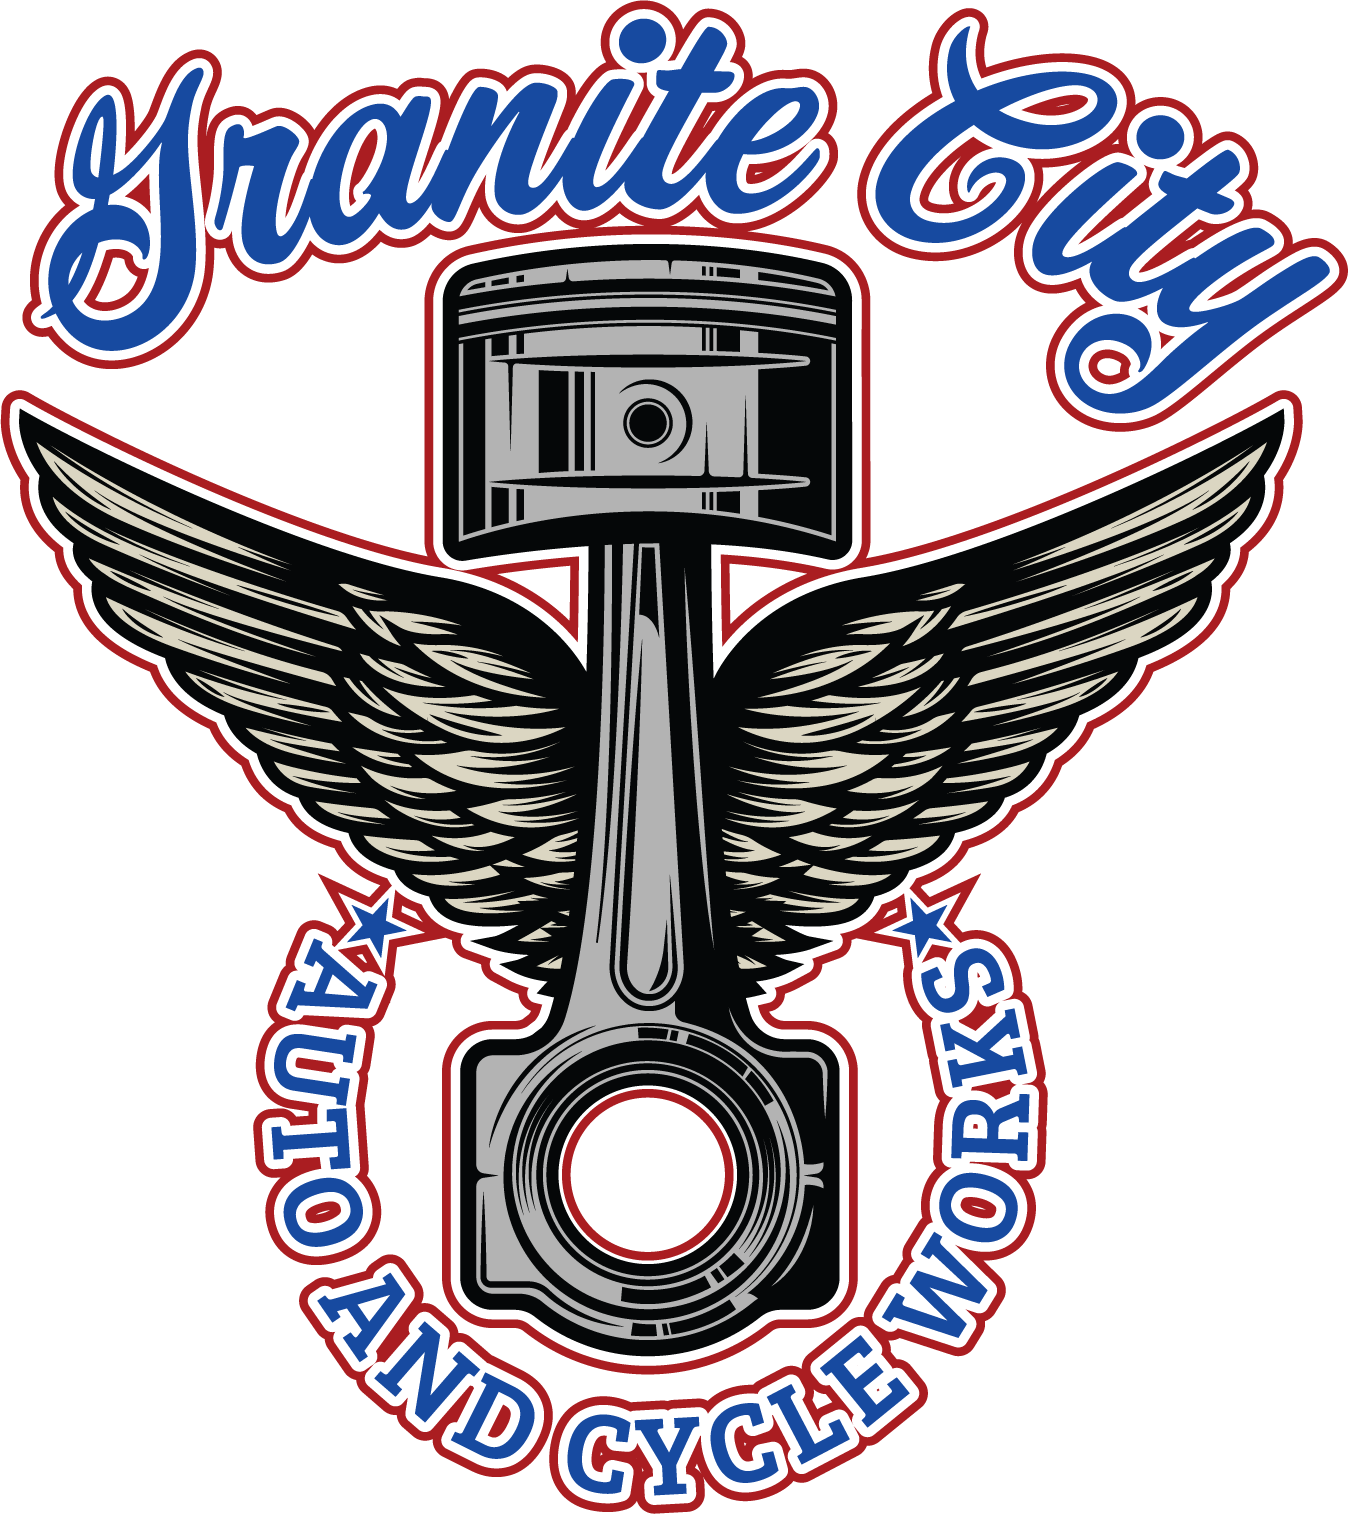 Granite City Auto and Cycle Works Logo